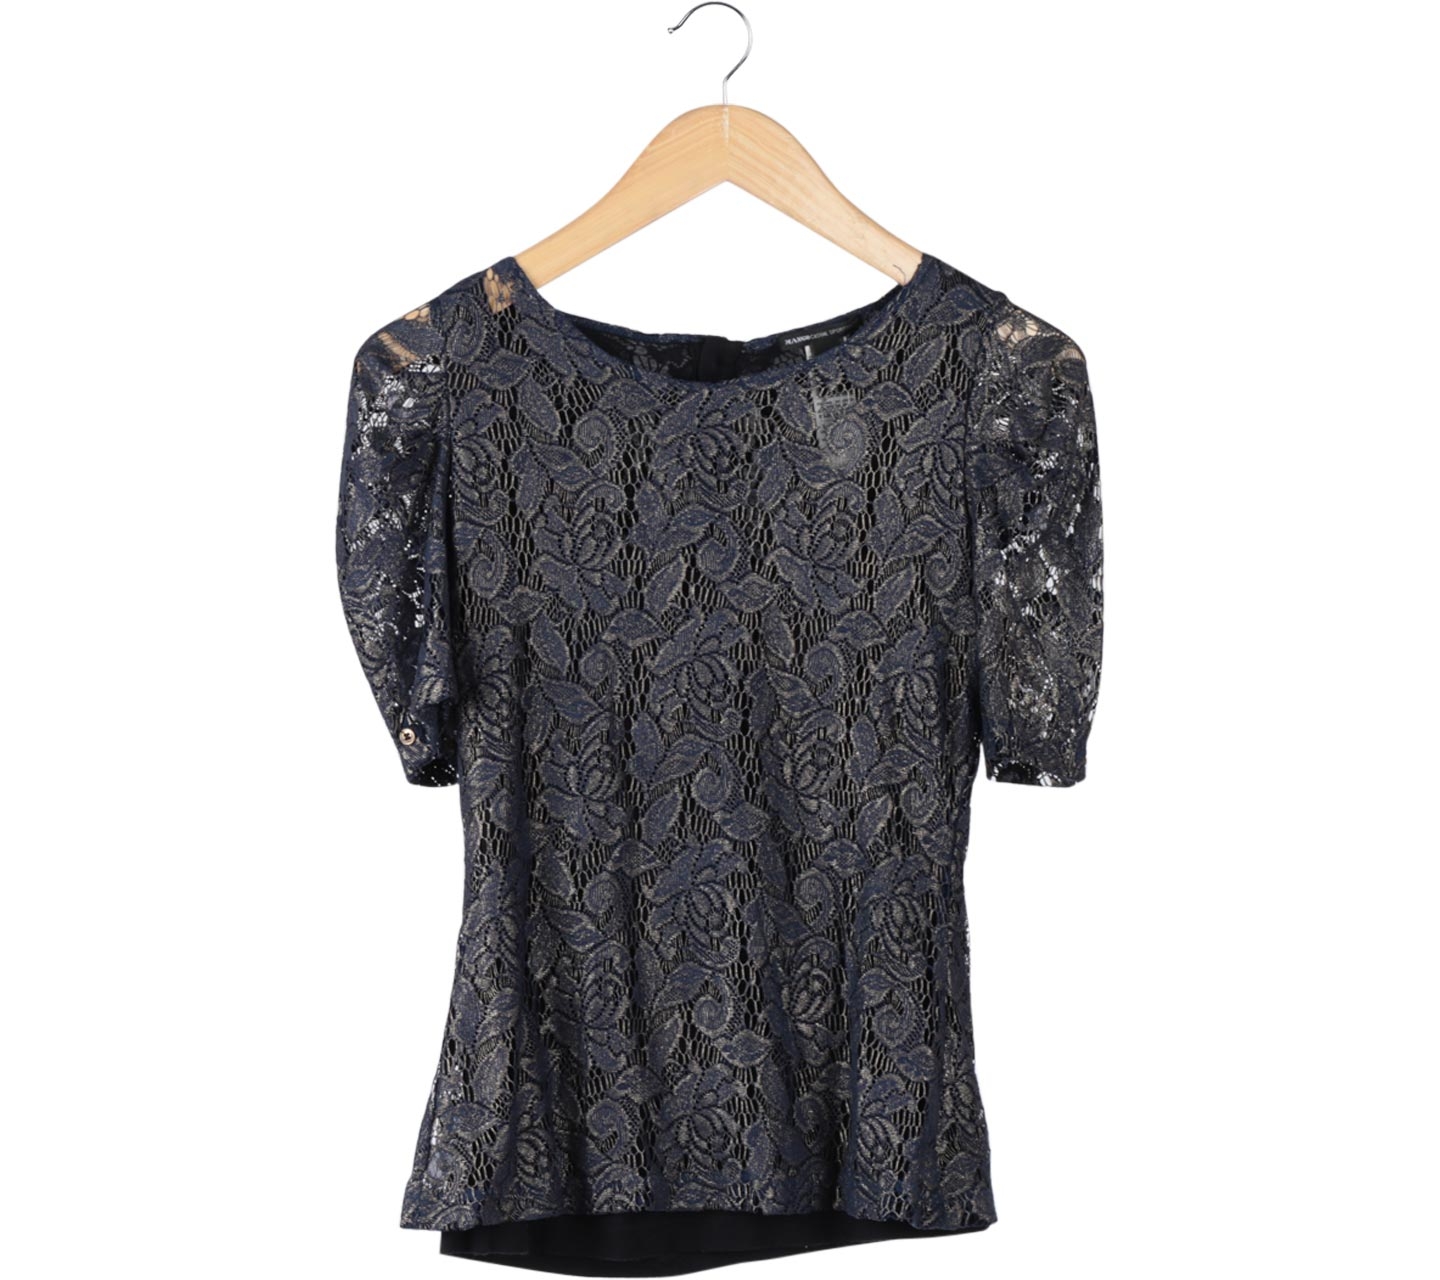 Mango Dark Blue And Gold Floral Lace Blouse